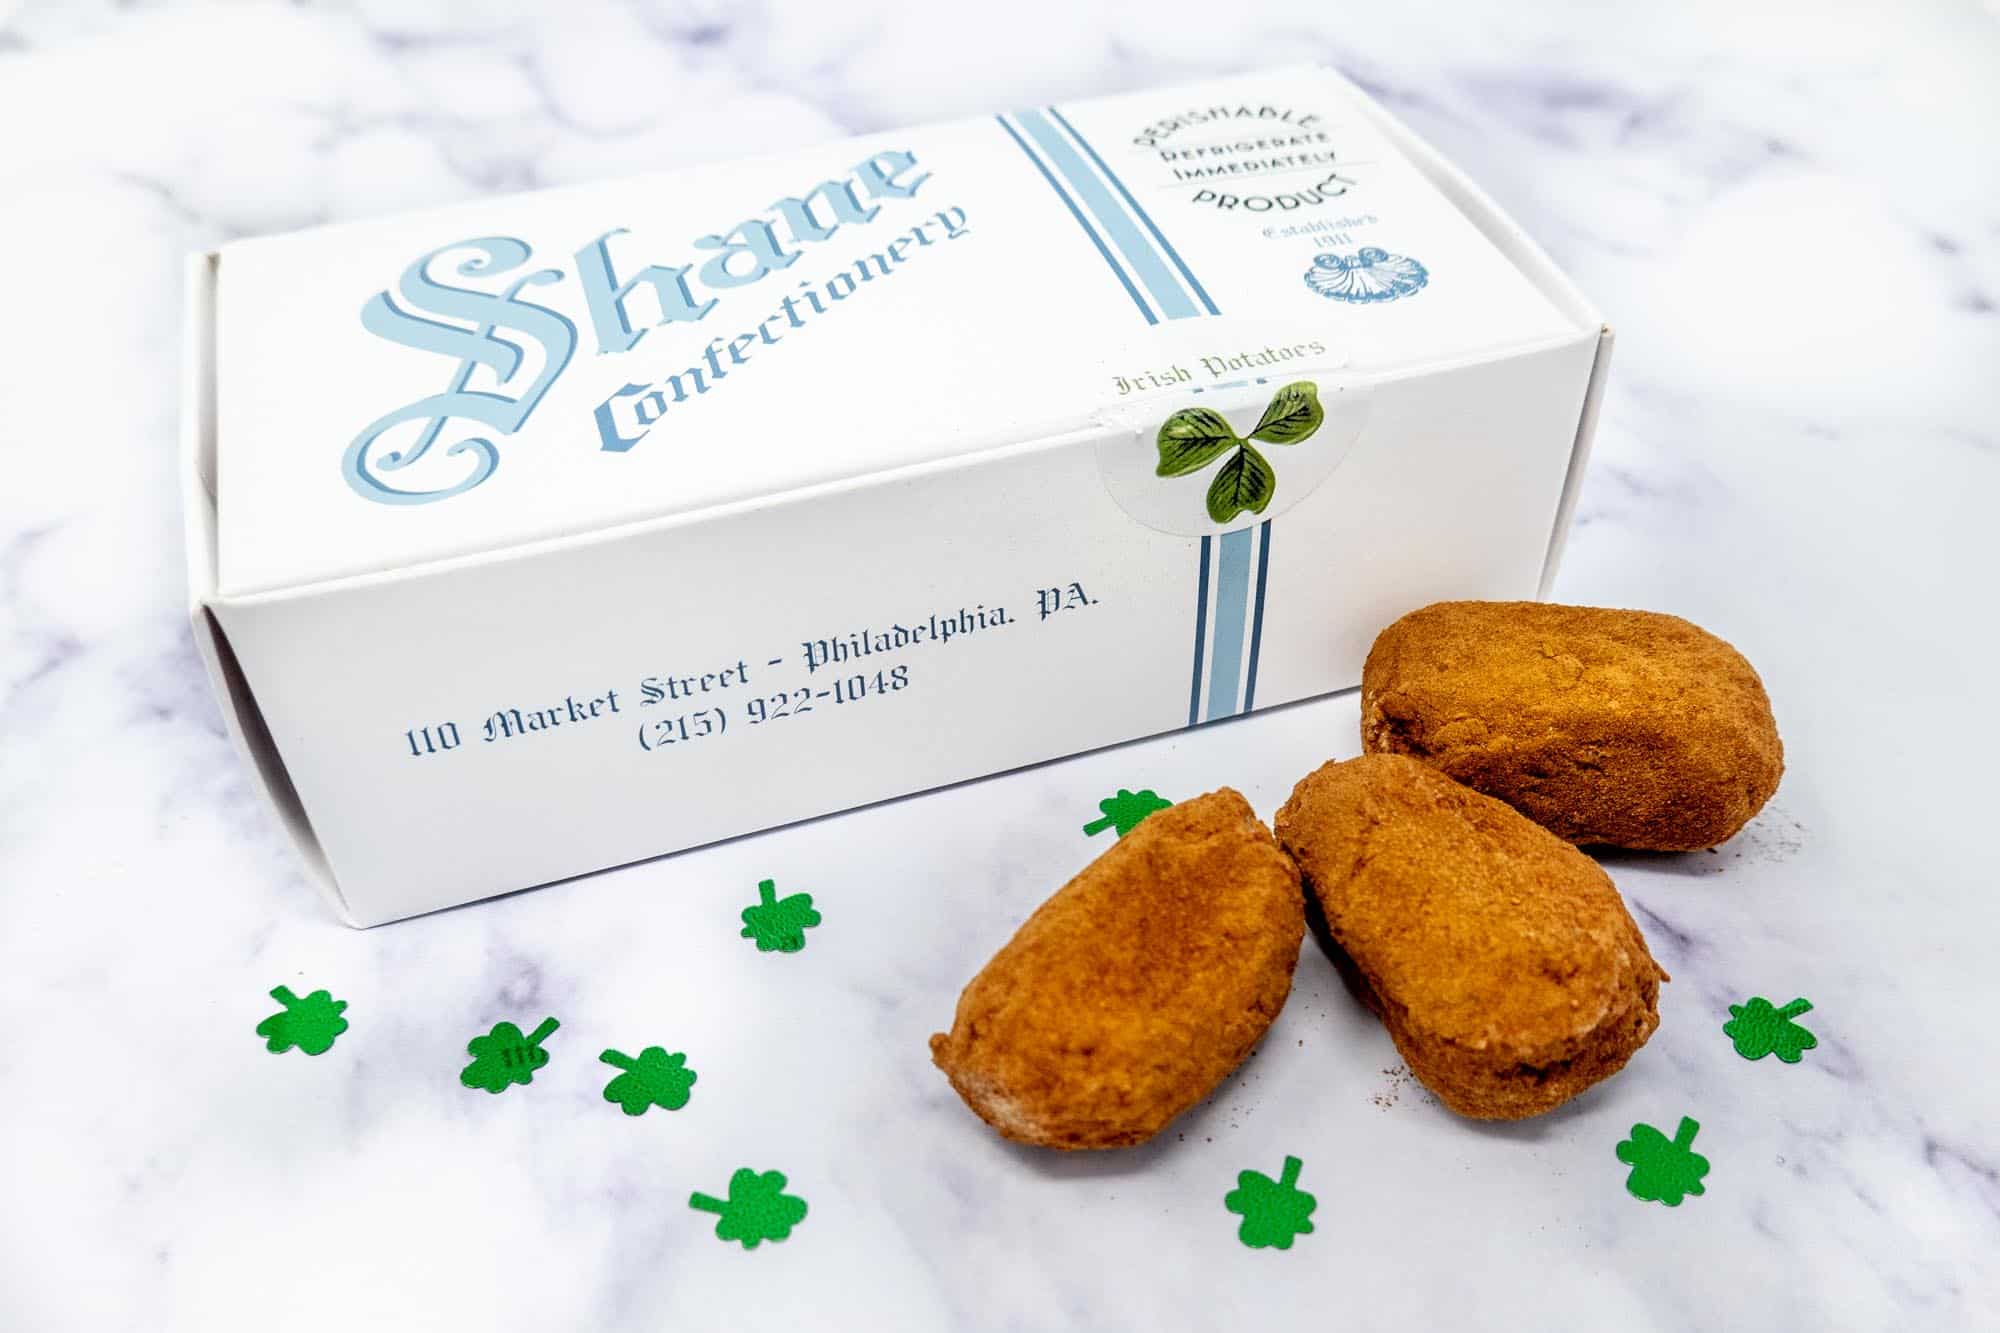 Three Irish potato candies and a box from Shane Confectionary